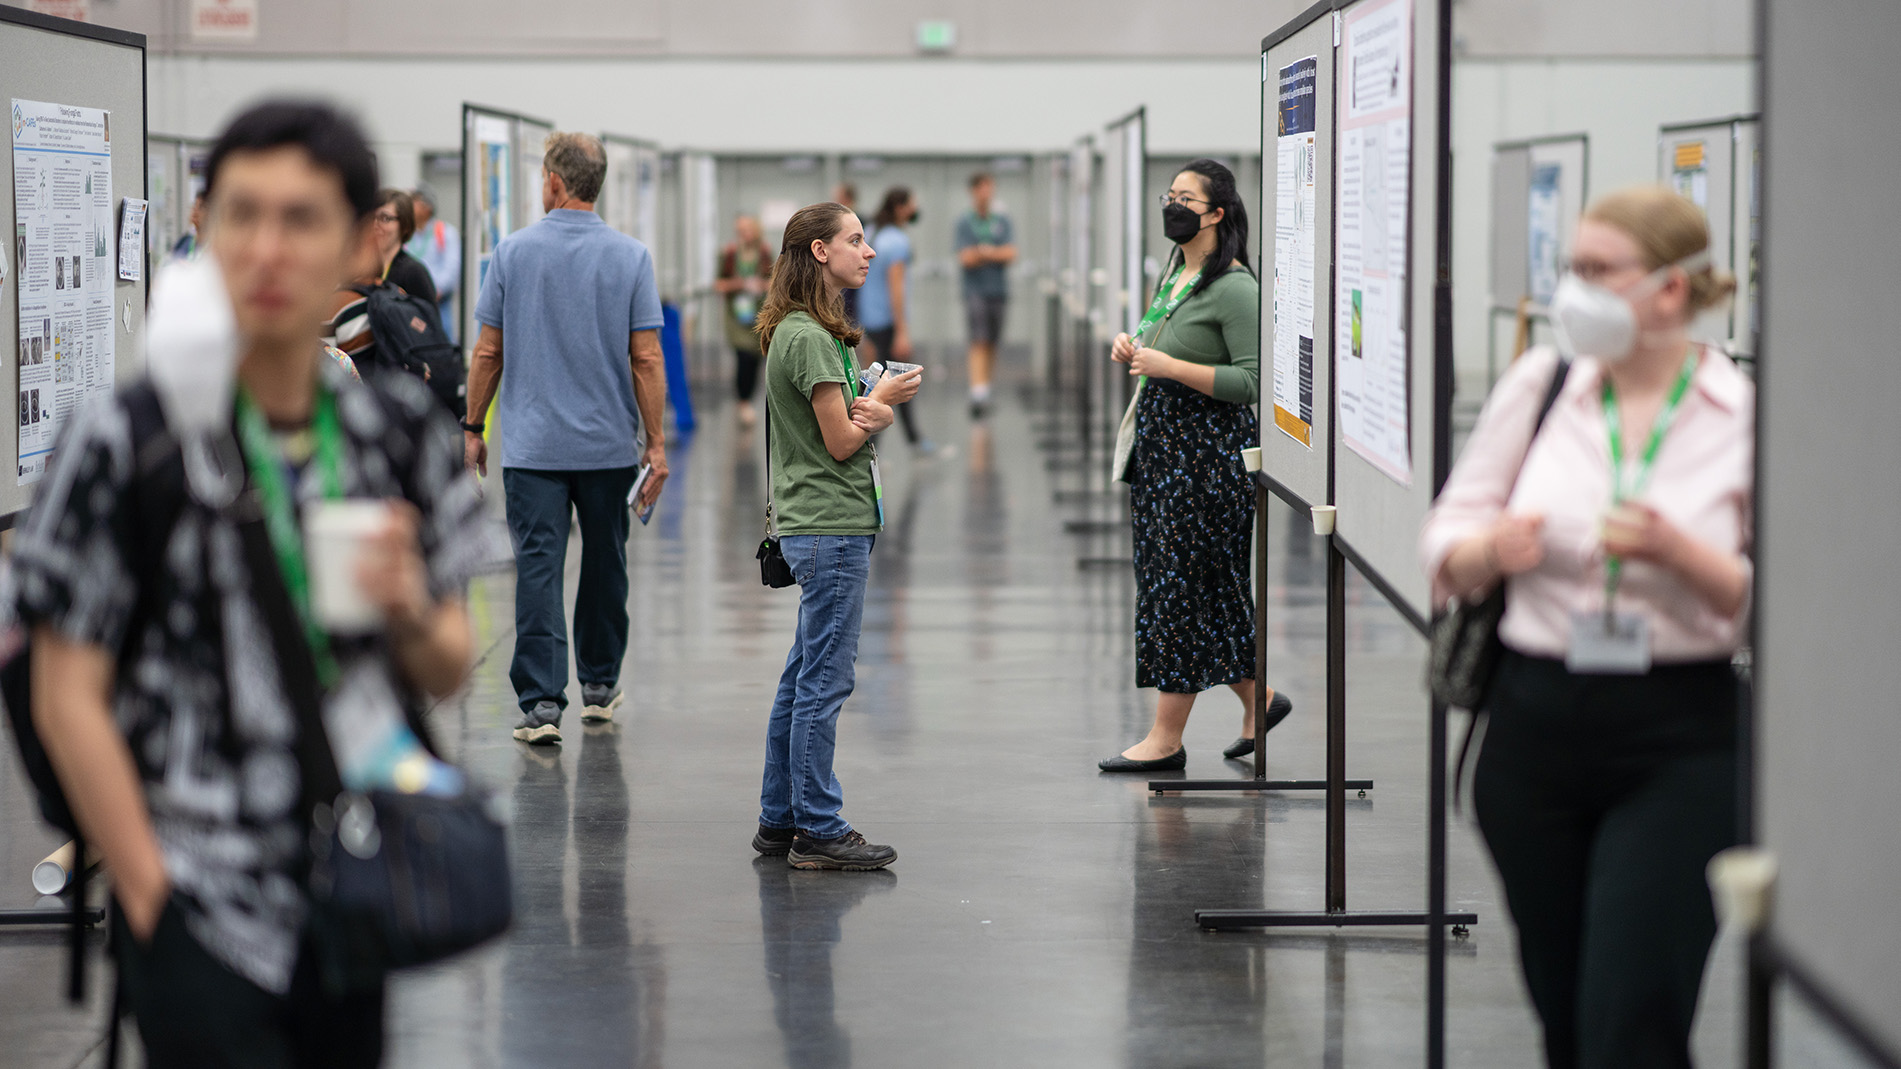 A poster presenter discusses a topic.